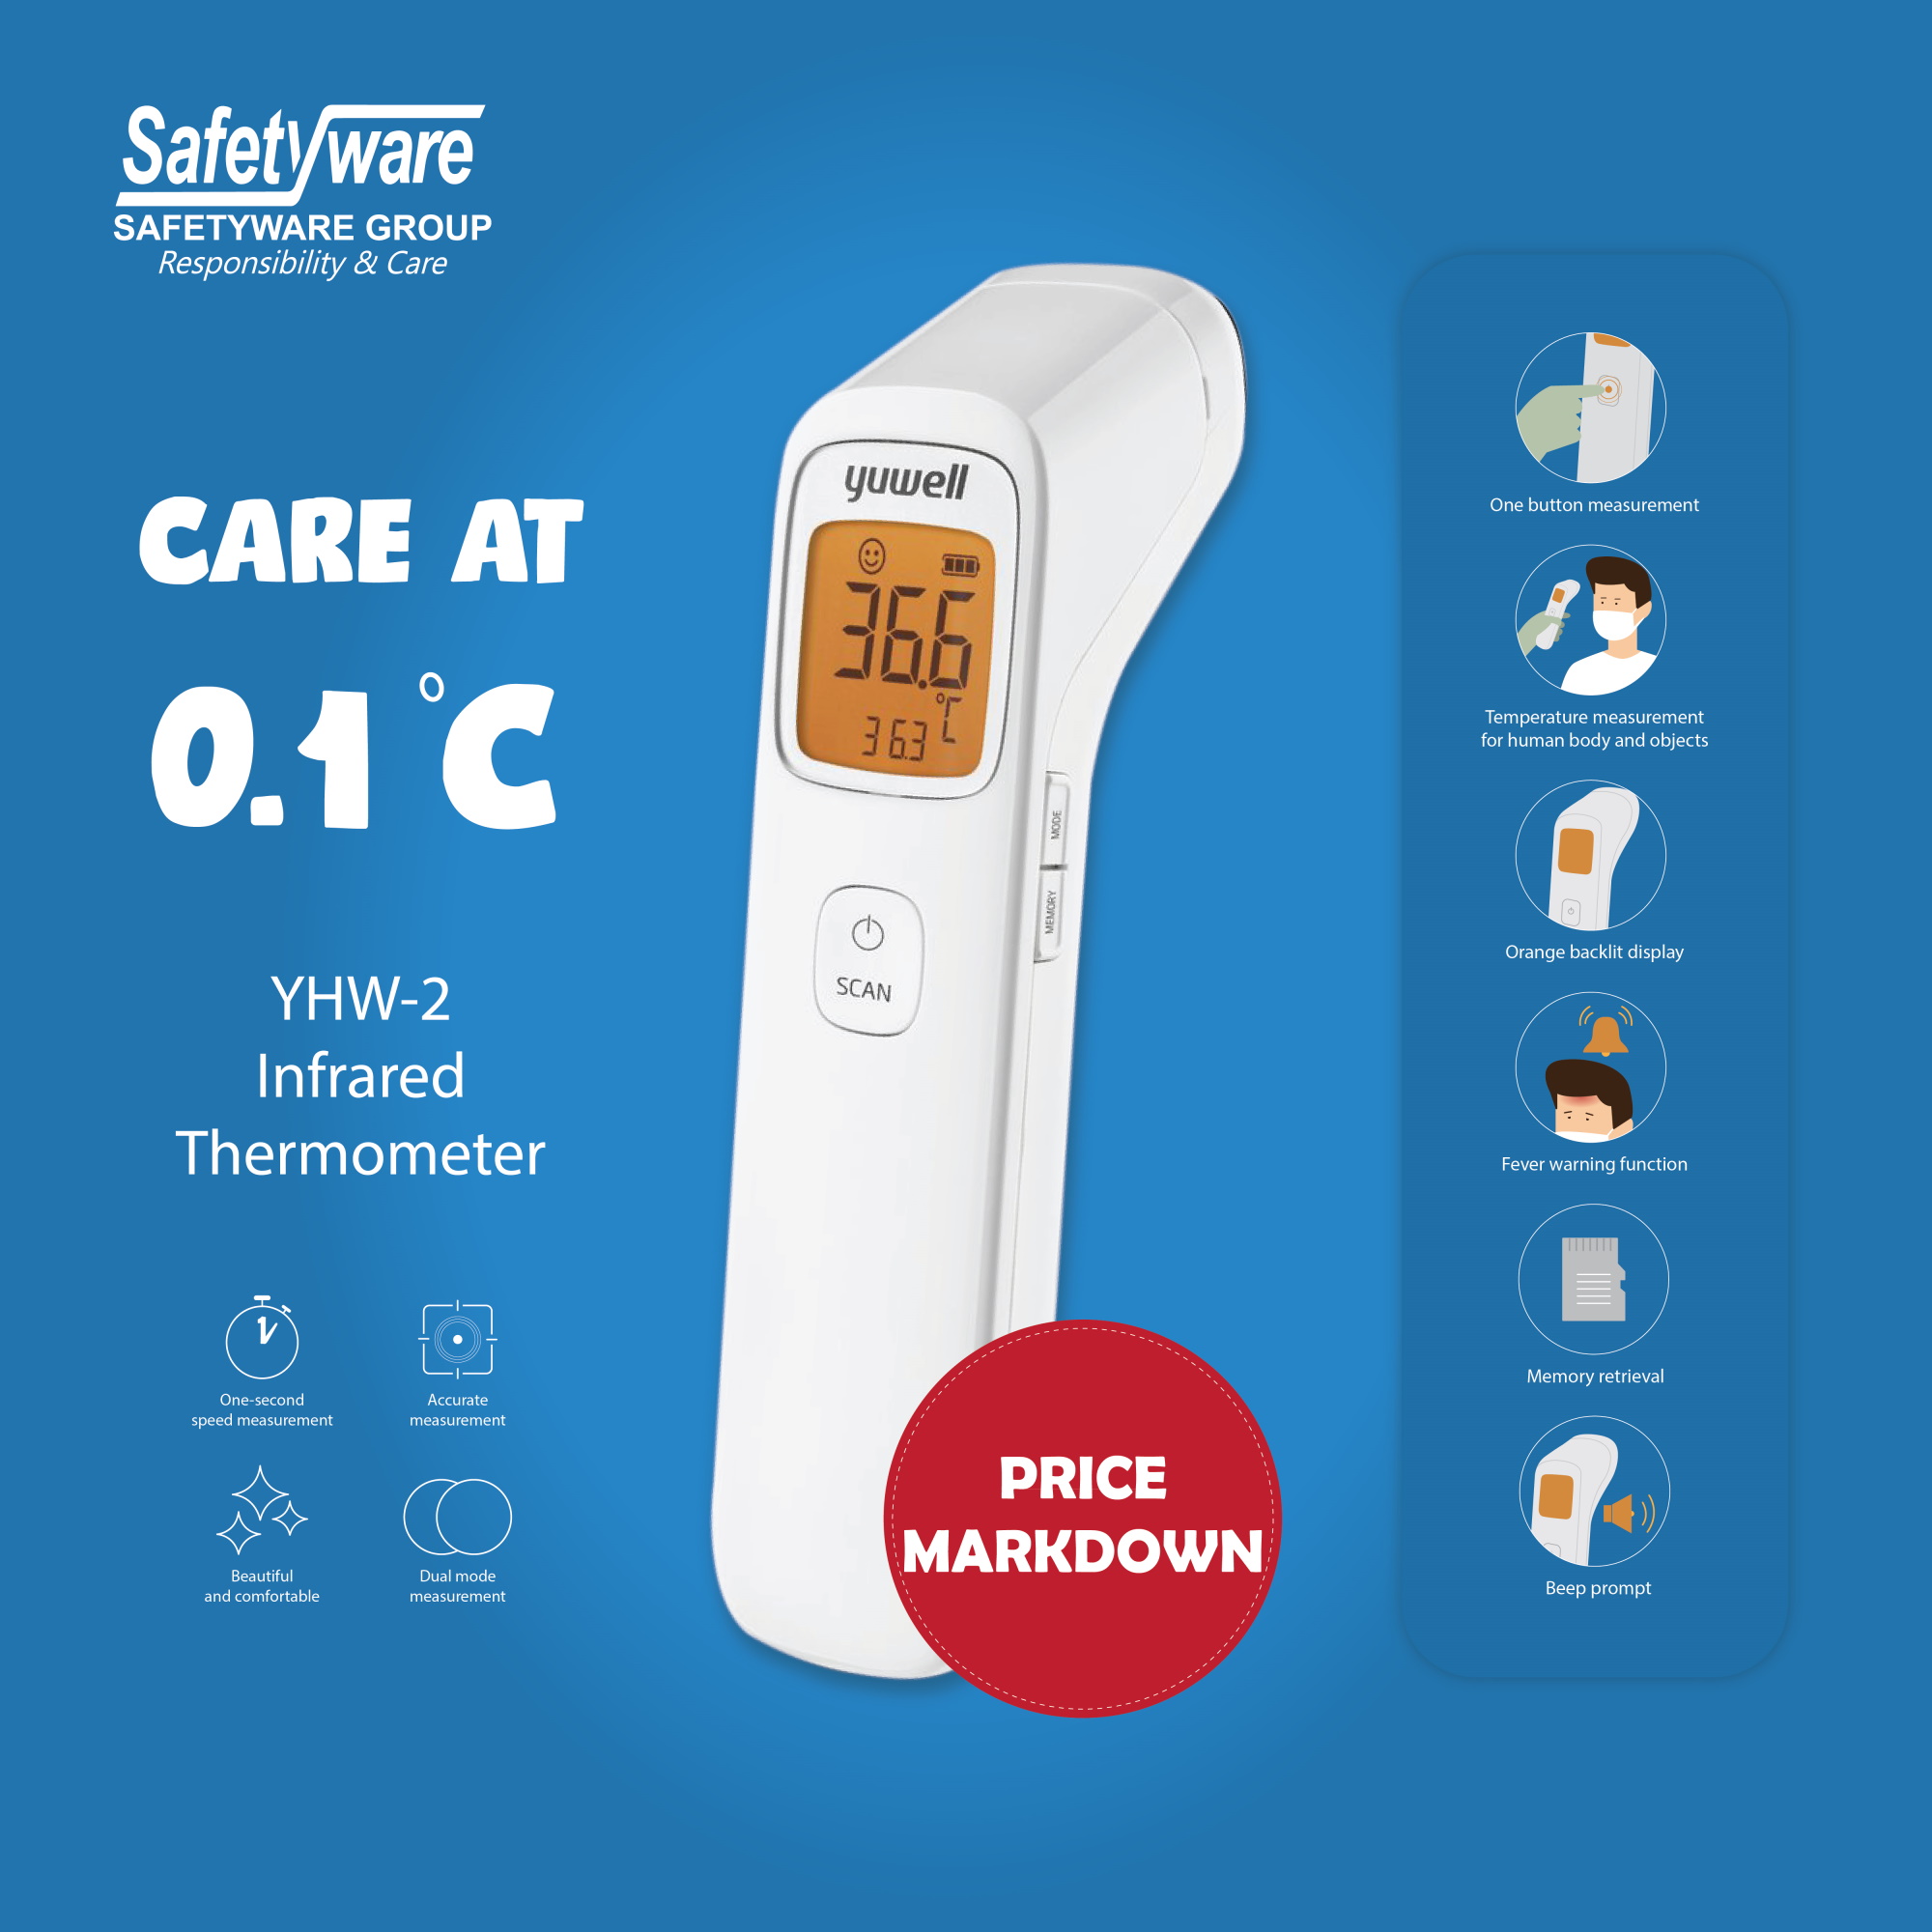 Thermometer Price Mark Down - RM39.90 unit